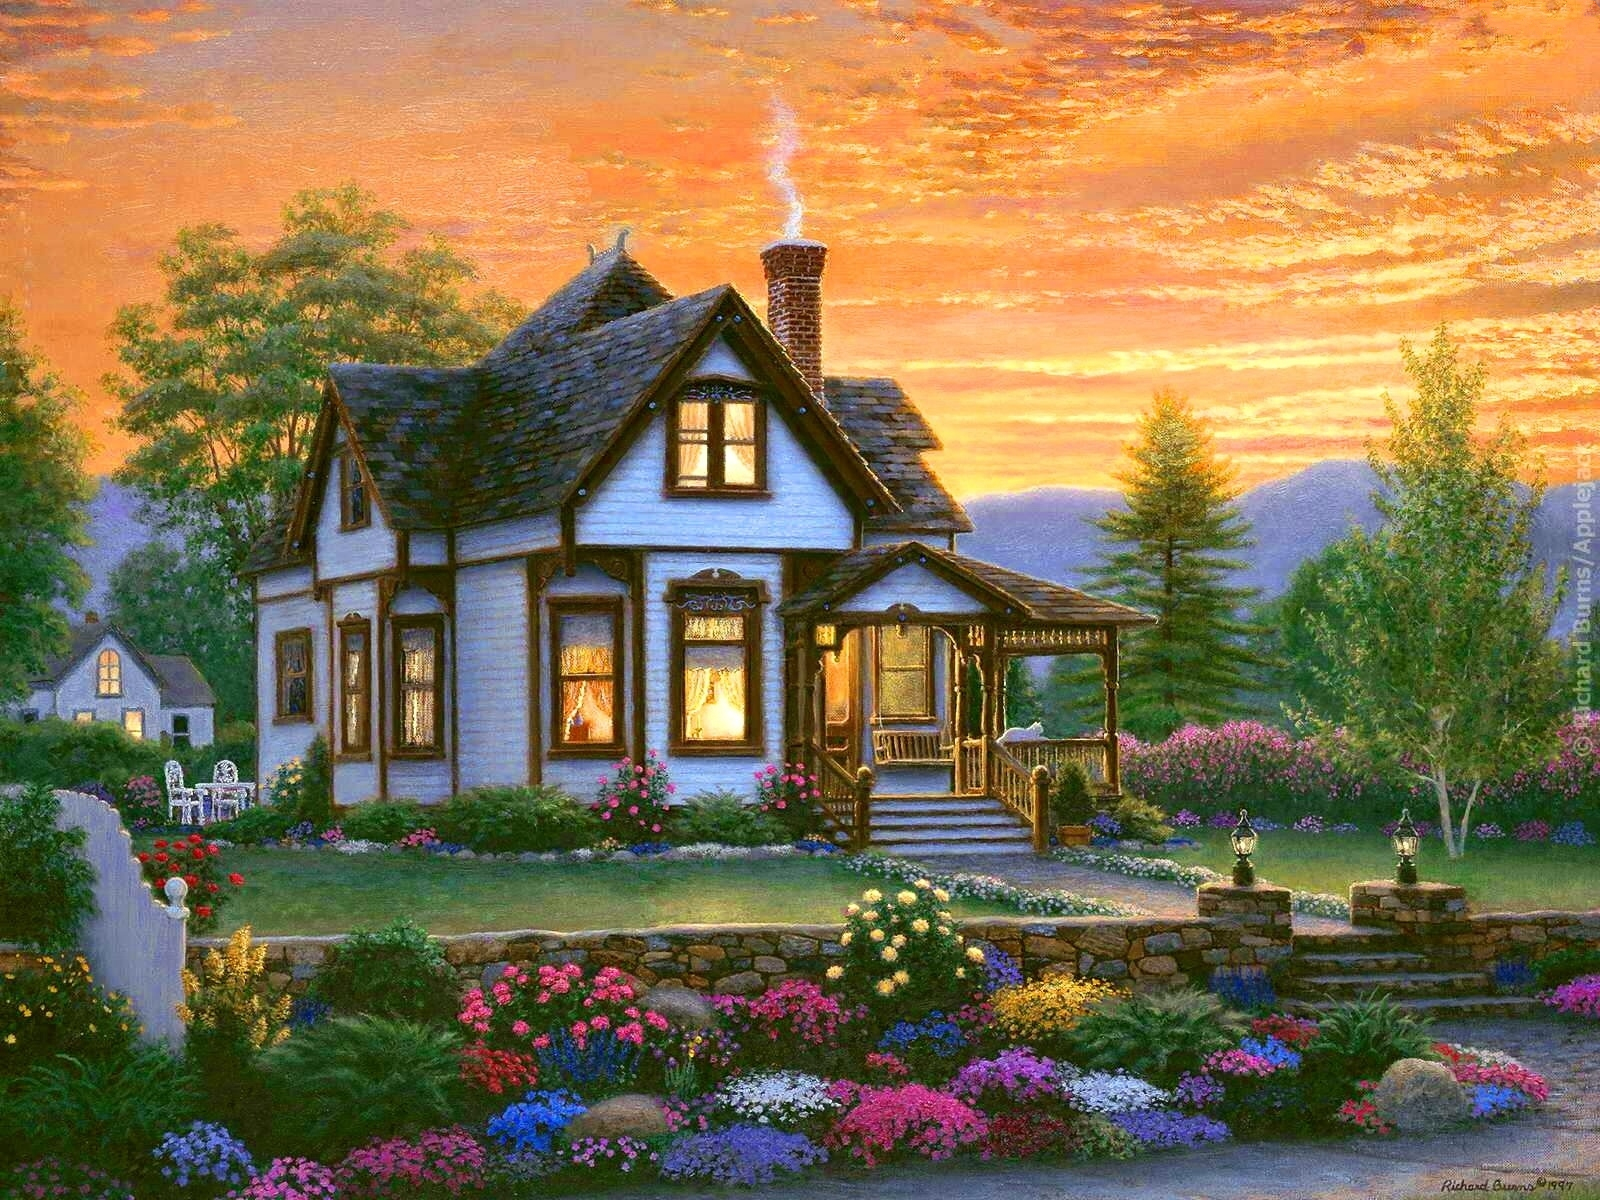 Cottage in the Sunset by Richard Burns